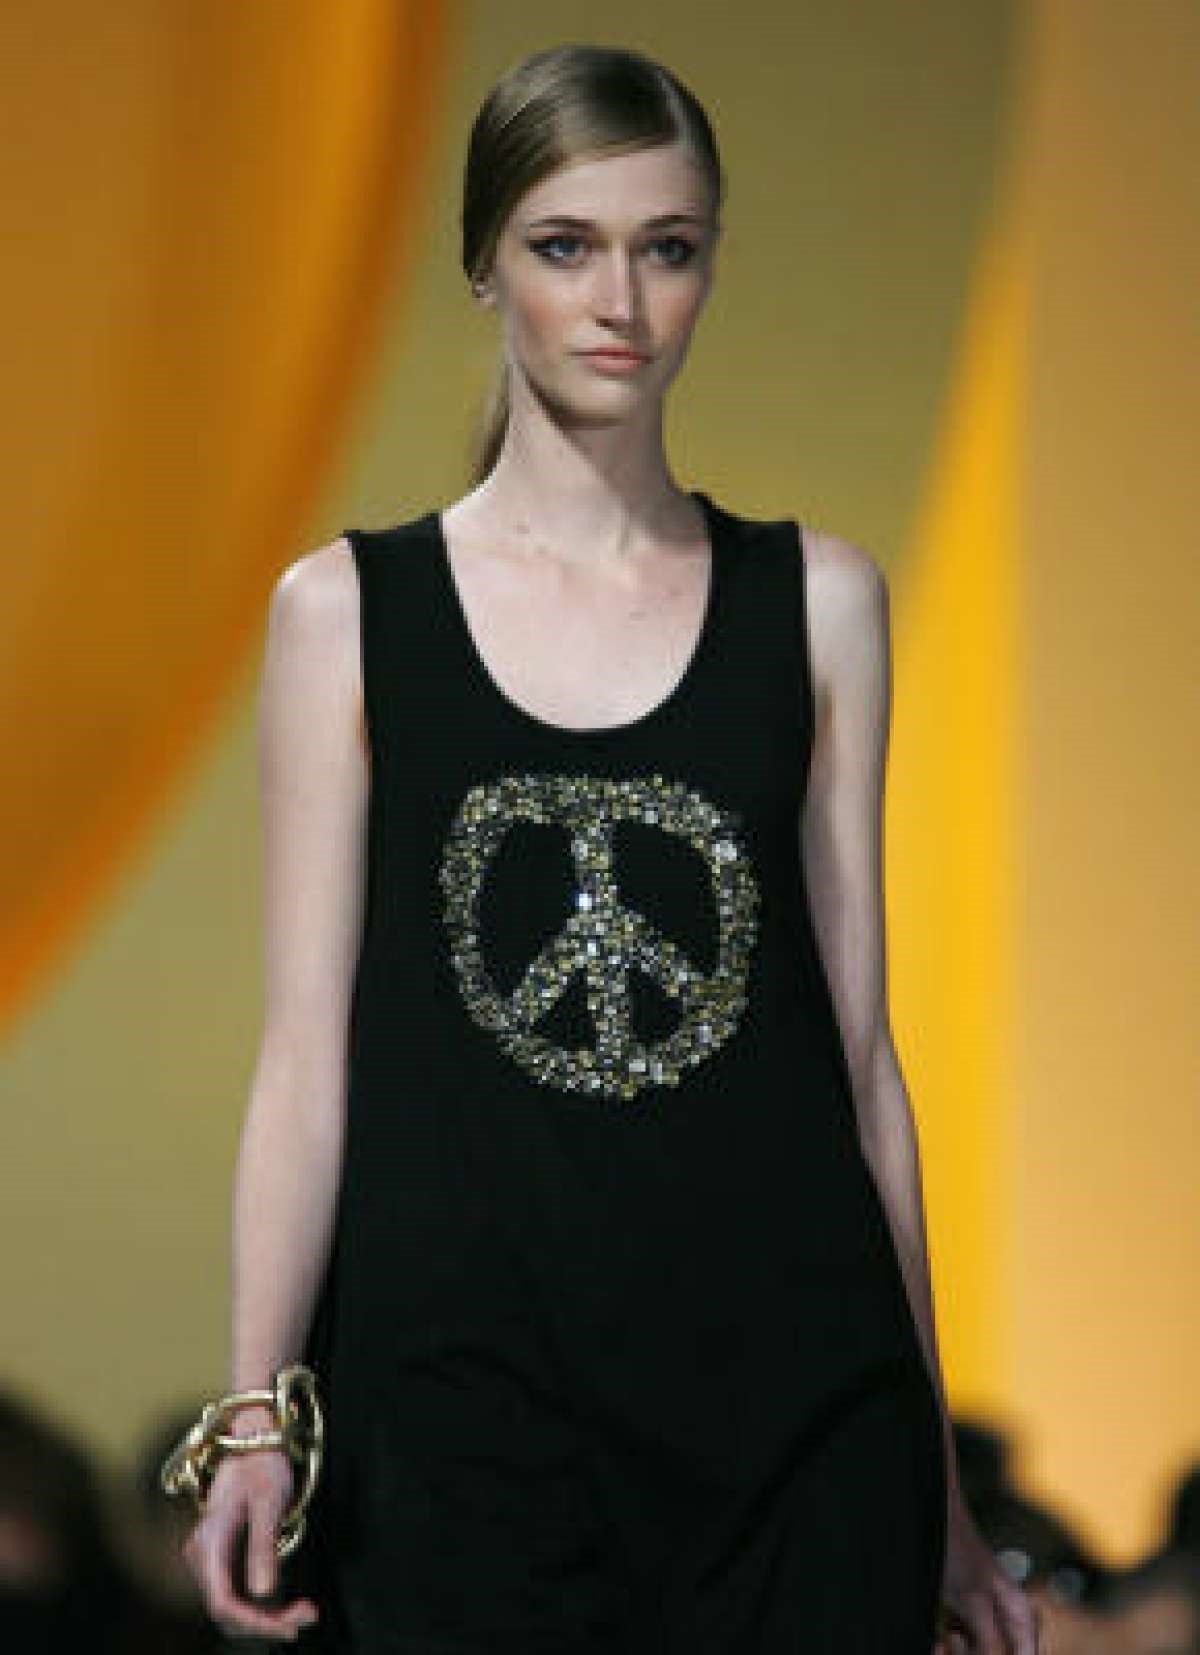 moschino runway model with peace sign shirt in 2008.jpg